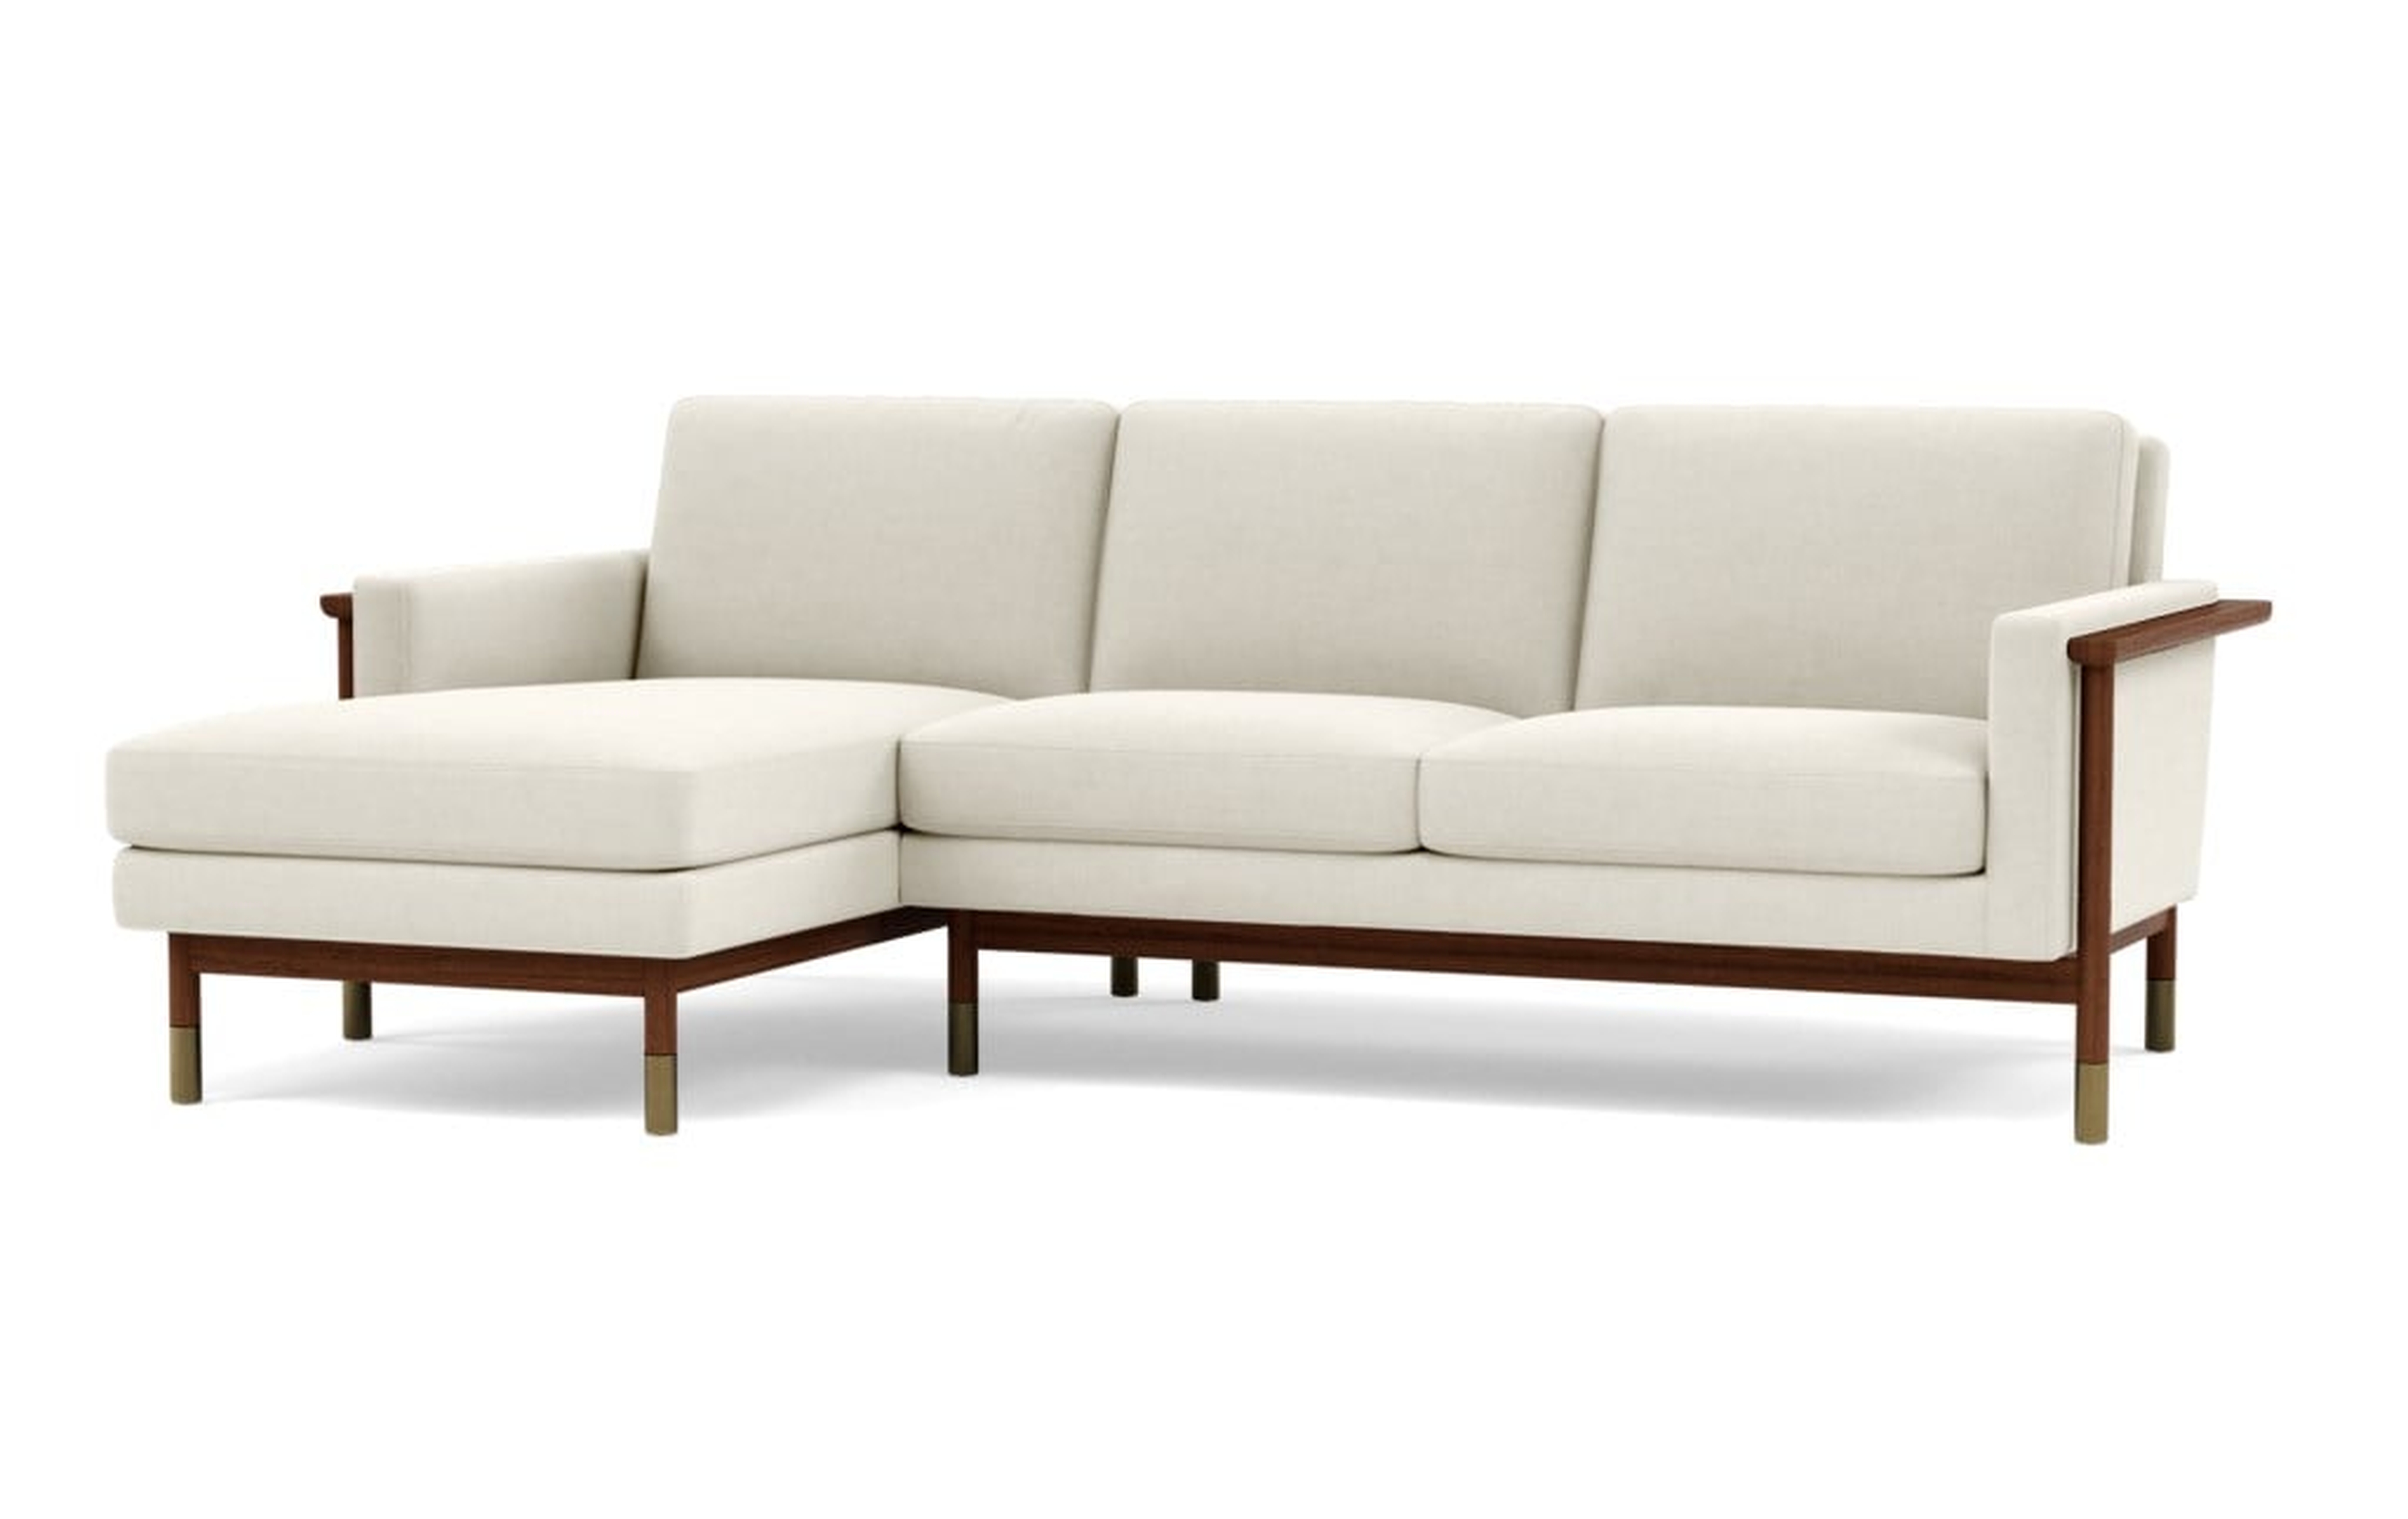 JASON WU Sectional Sofa with Left Chaise - Chalk - Oiled Walnut with Brass Cap - Interior Define